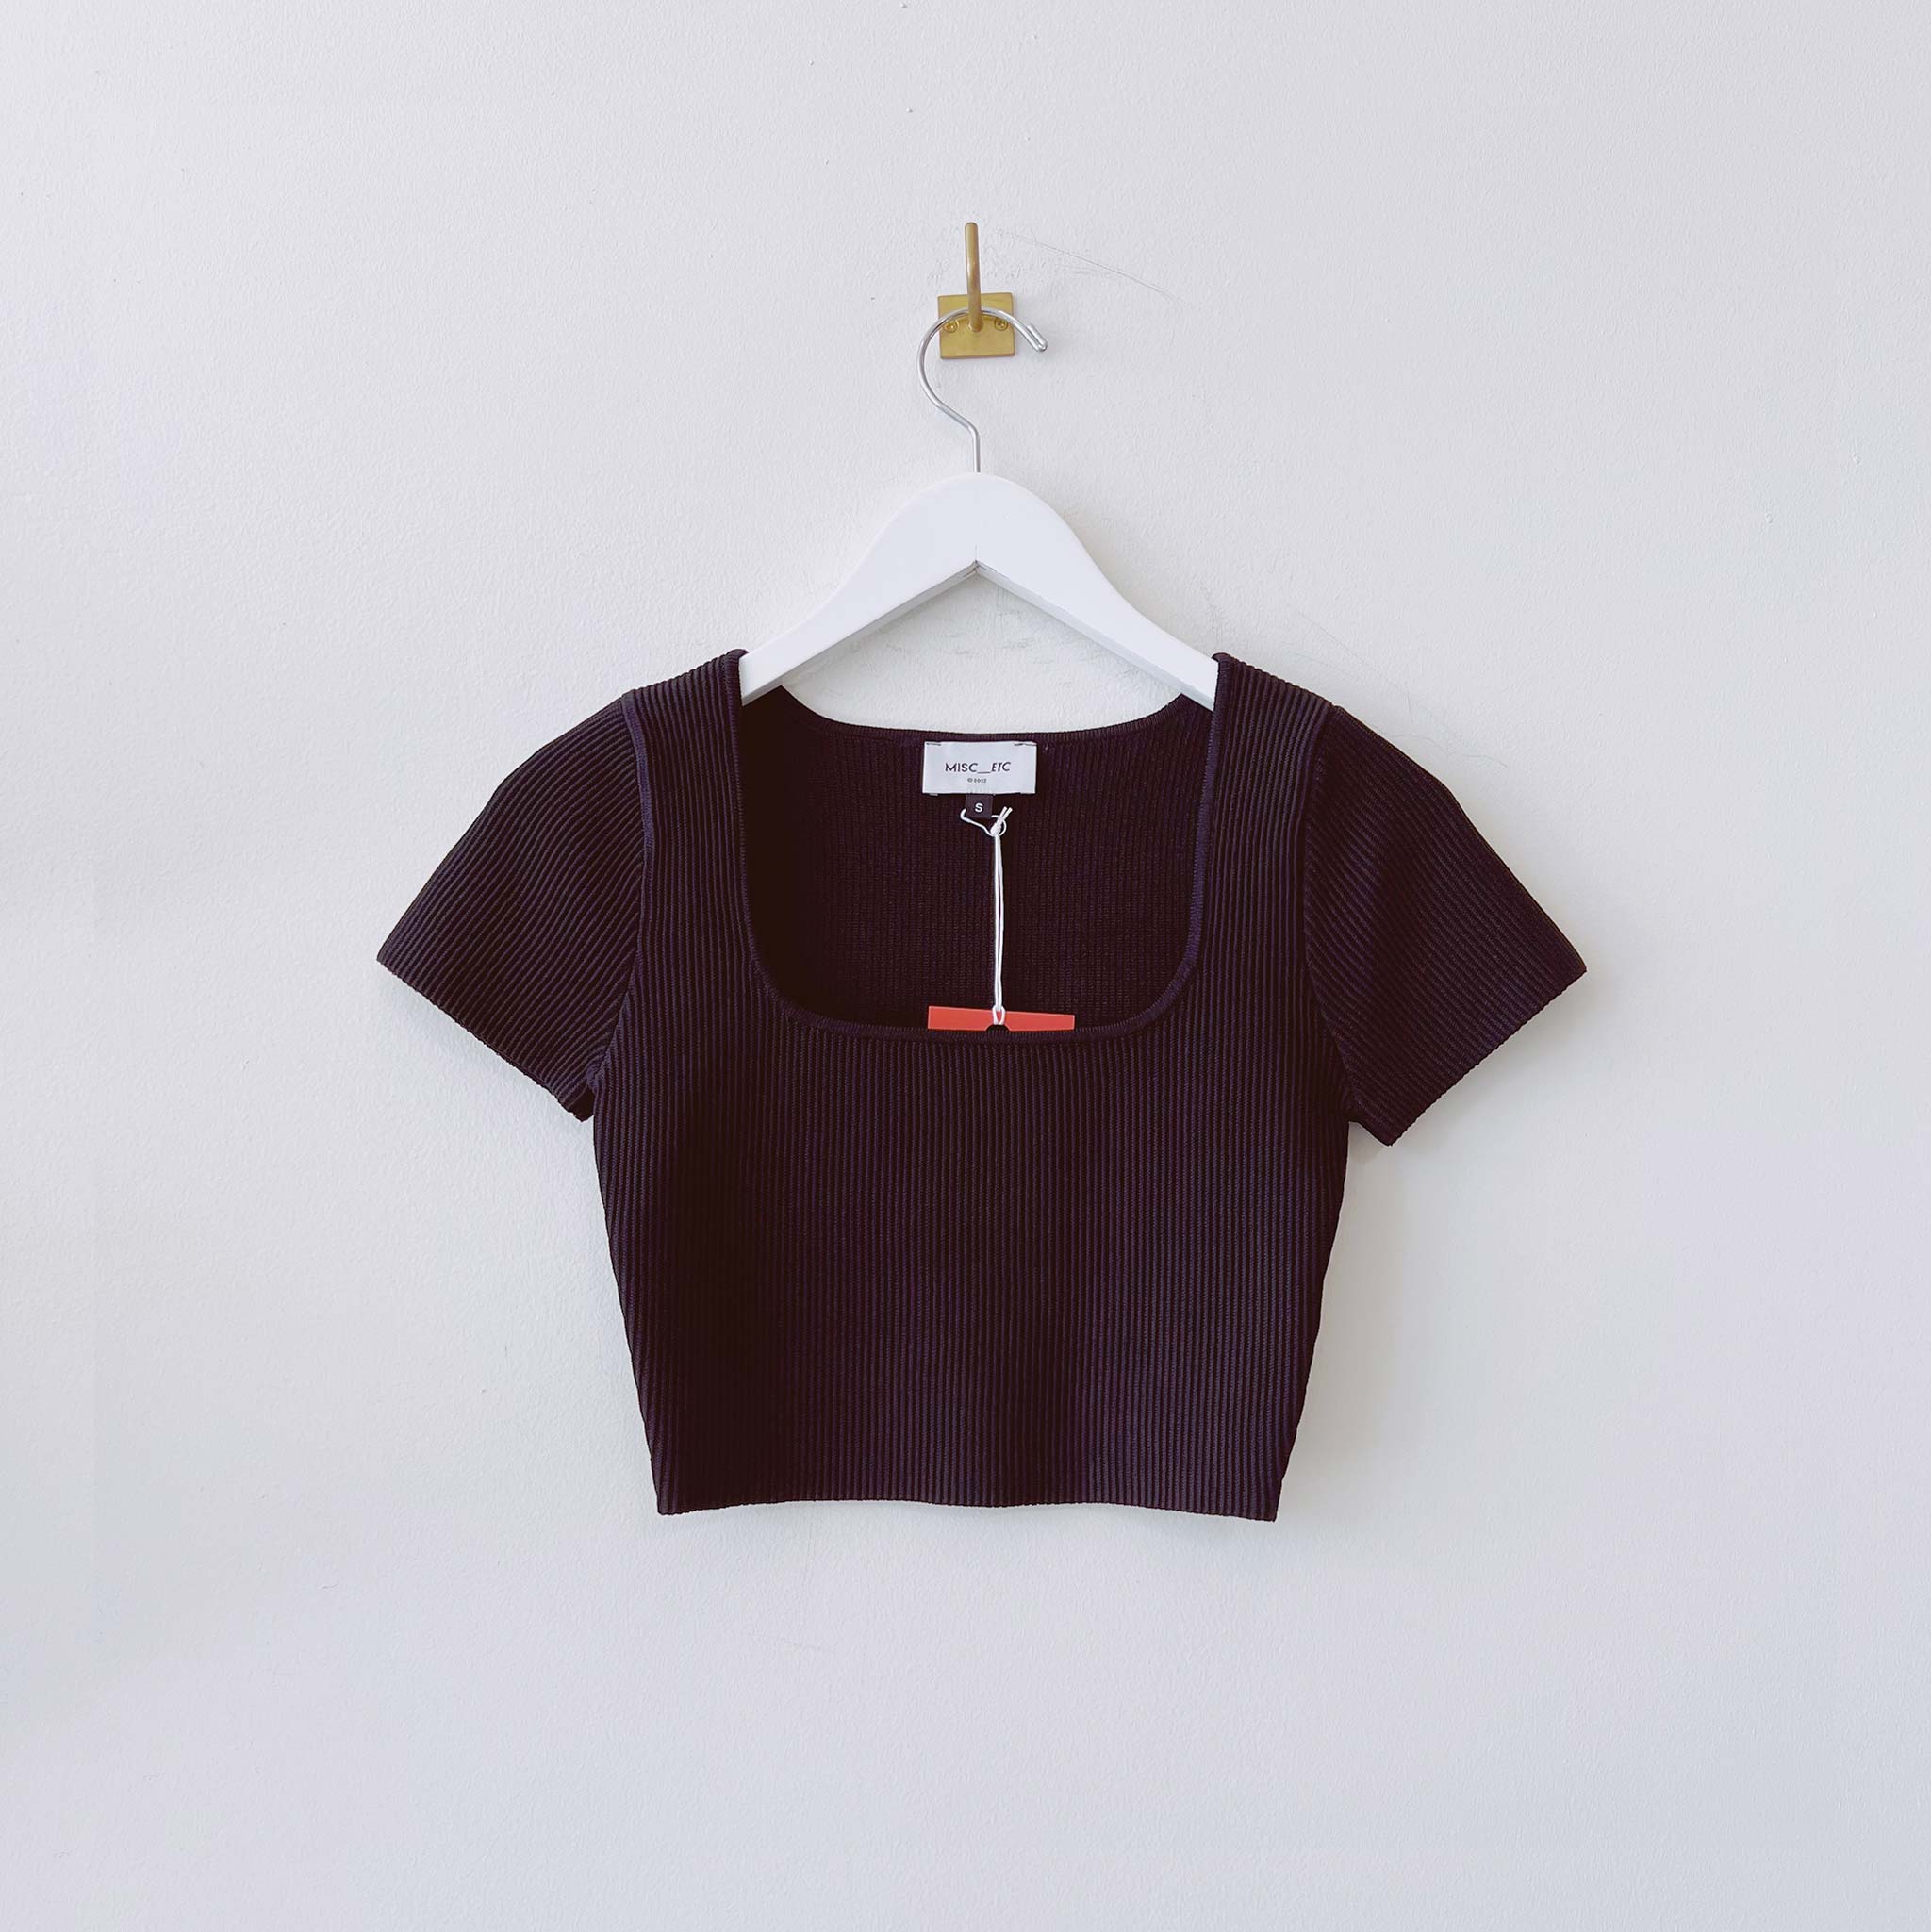 Flat hanging photo of the Square Neck Crop Tee - Black.